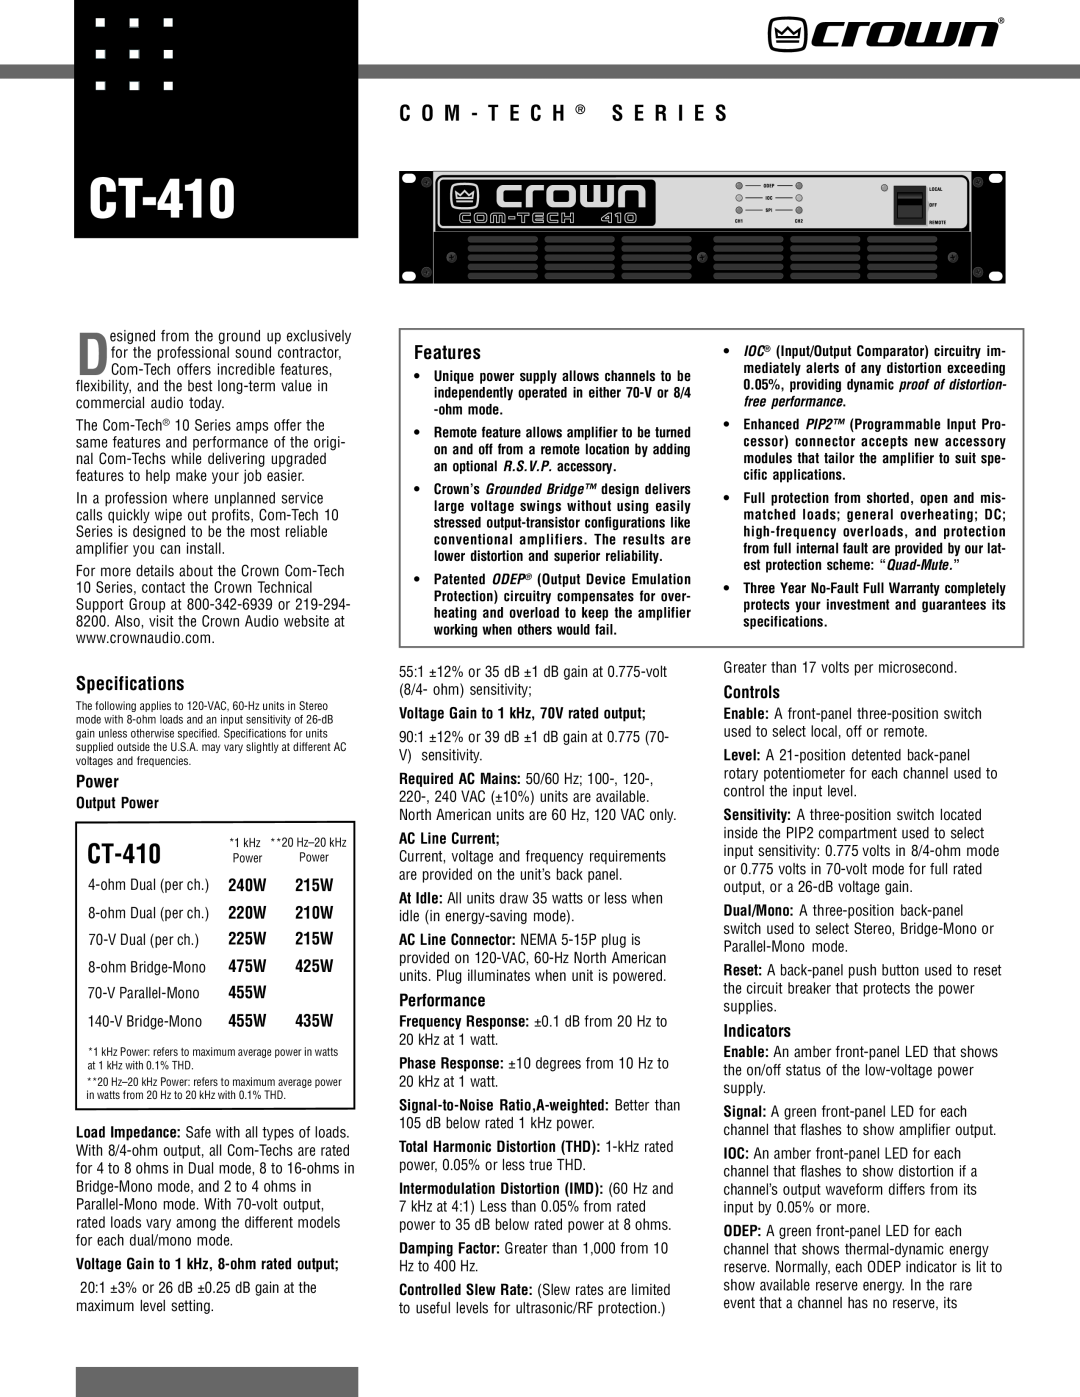 Crown Audio CT-410 specifications Features, Specifications, Power, Performance, Controls, Indicators 